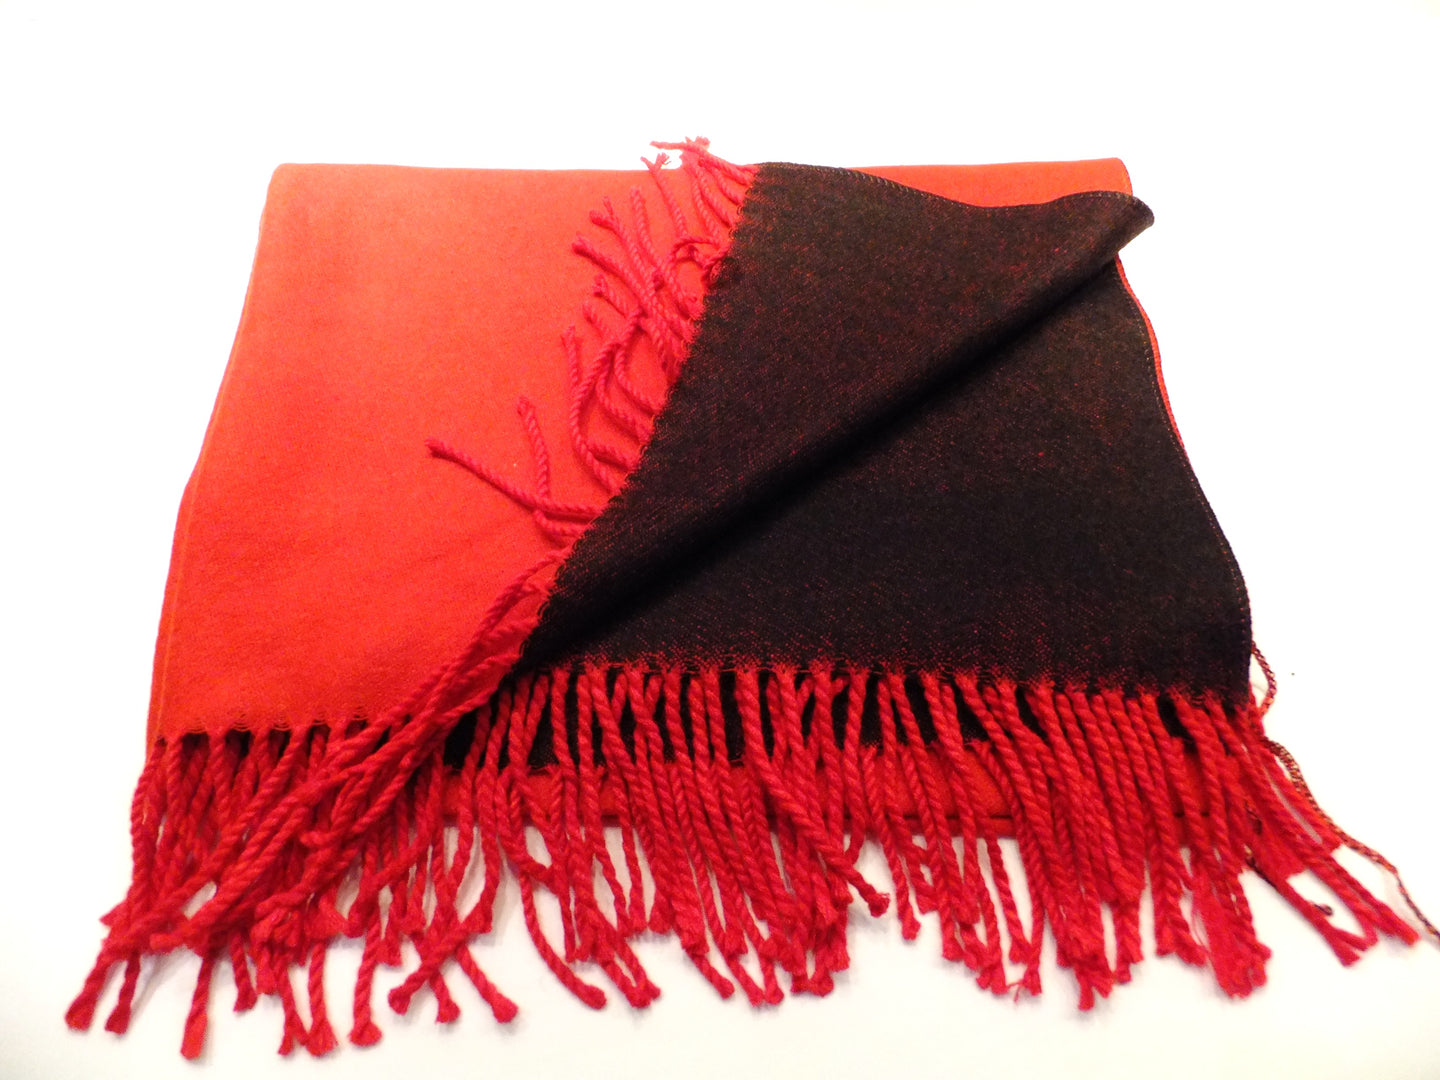 Red and black cashmere scarf